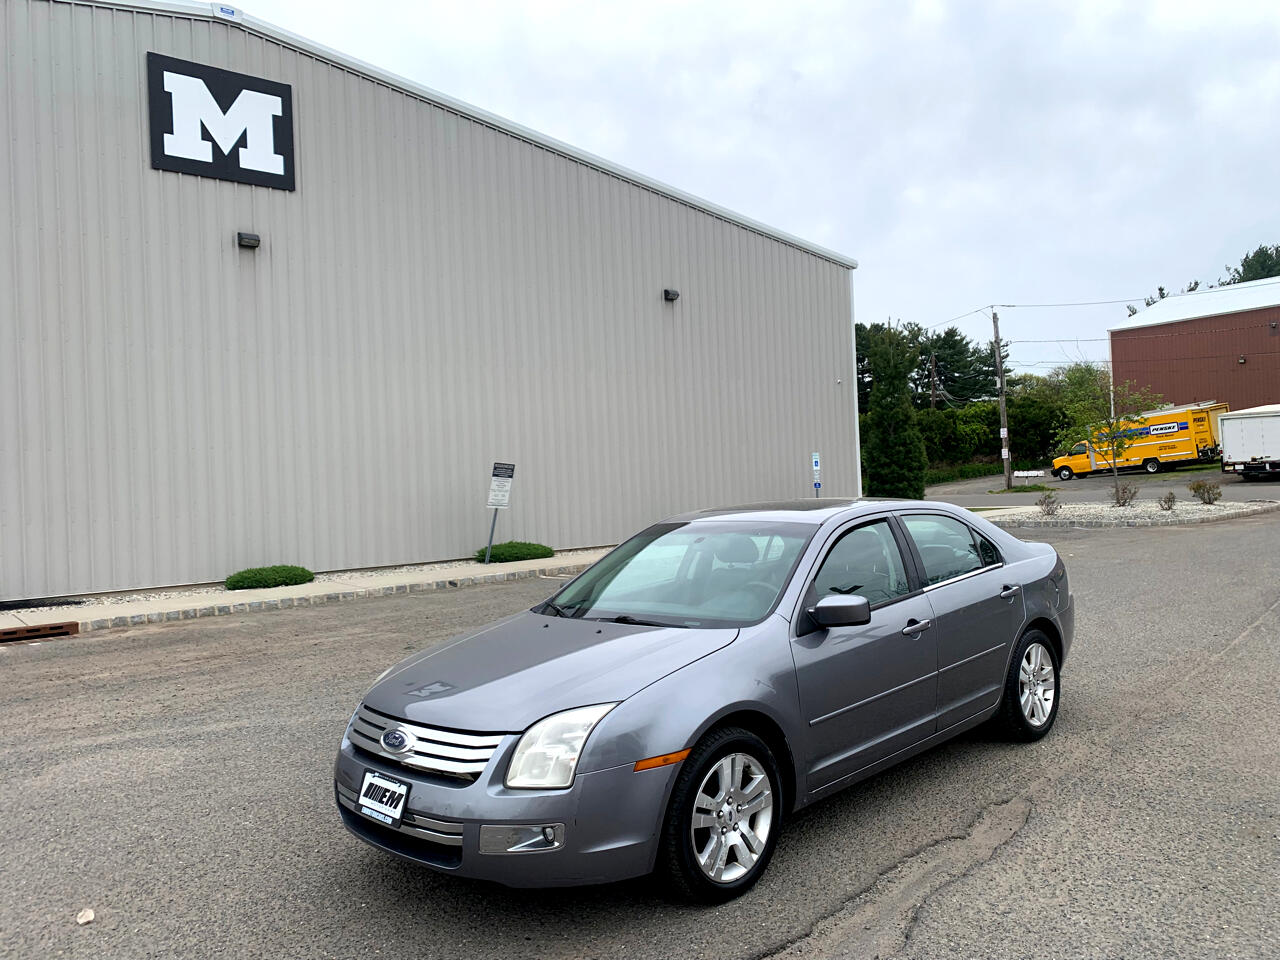 Ford Fusion 4dr Sdn V6 SEL FWD 2007